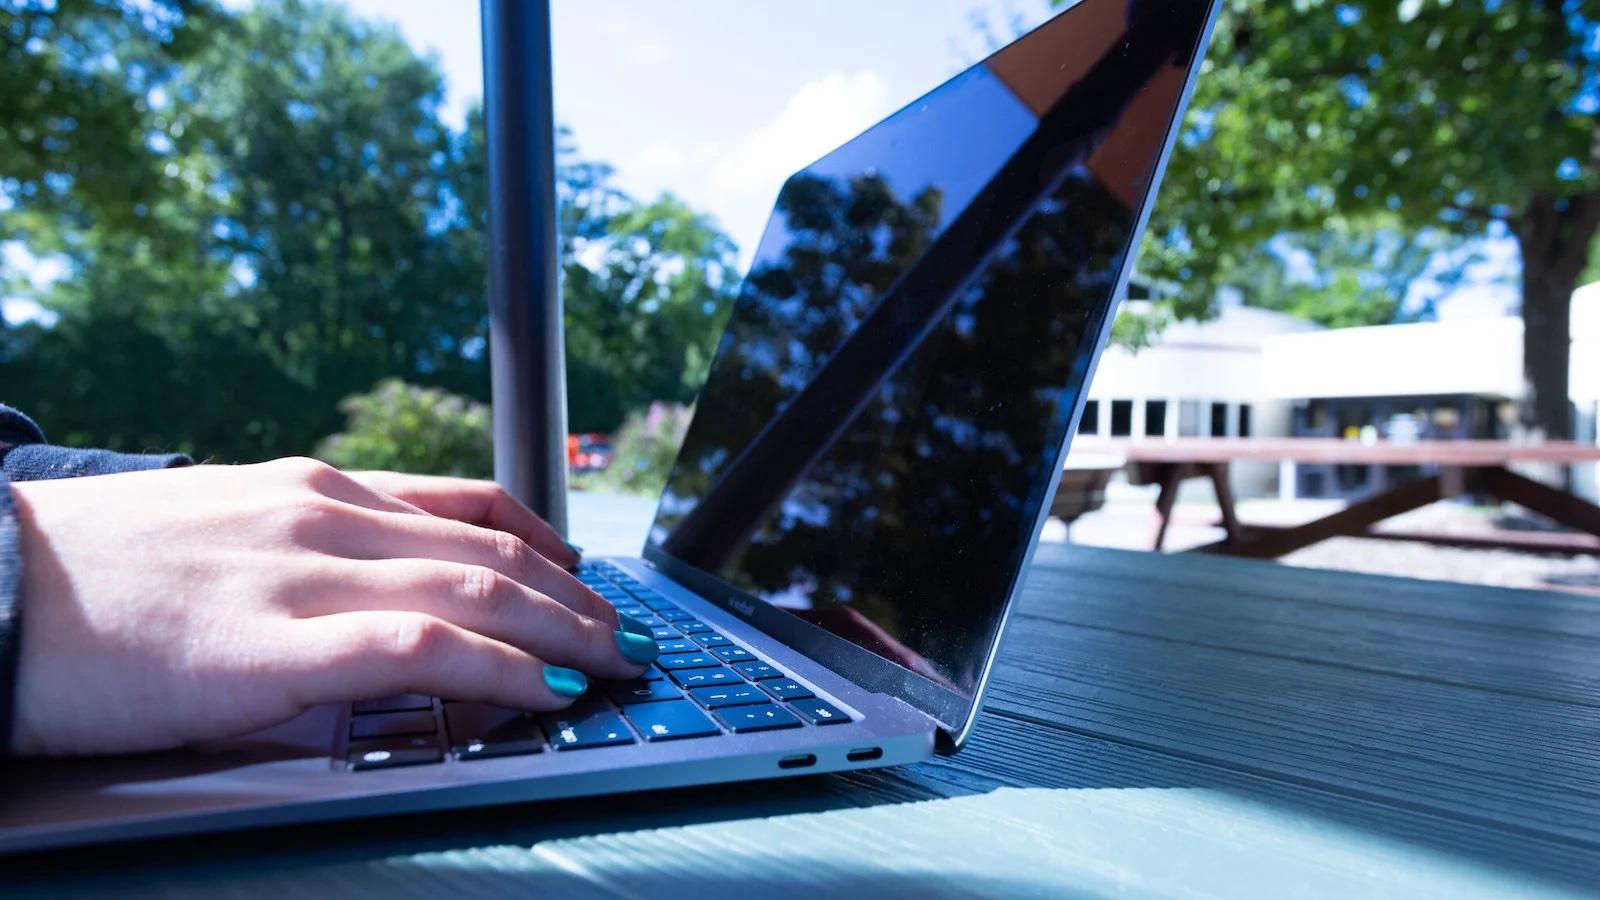 A student working on their laptop at a picnic table.